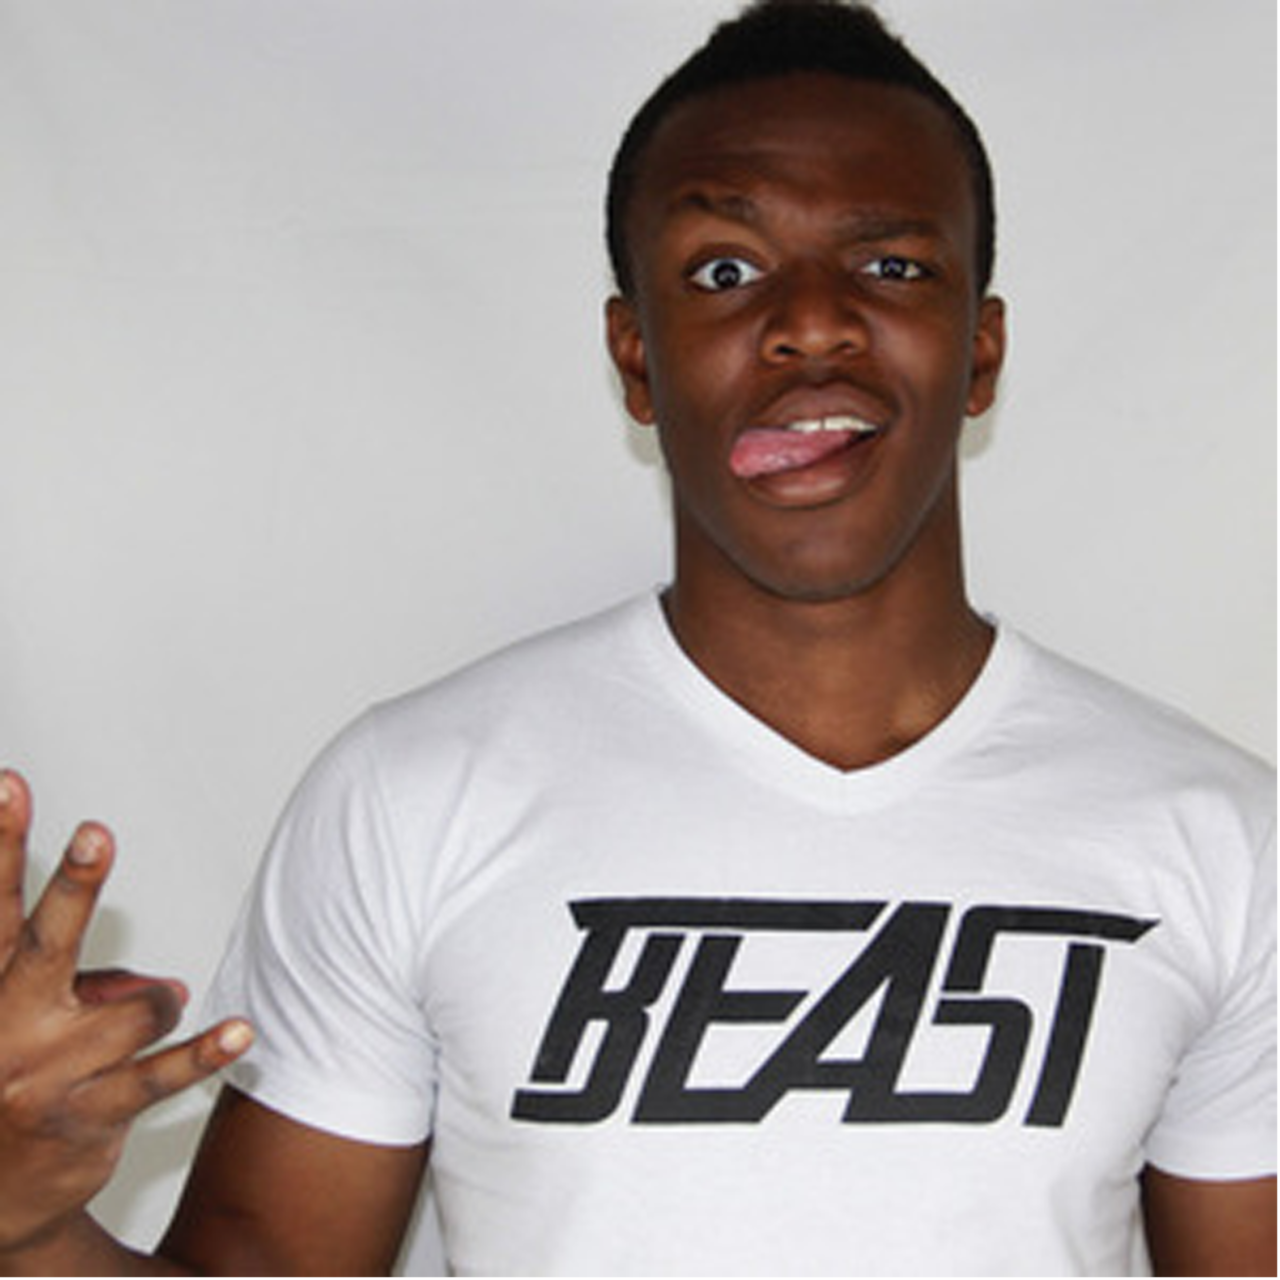 KSI Olajibebt started making videos to show off his FIFA skills but his channel has evolved into producing entertaining and varied content which has gathered adoring fans from all over the world.